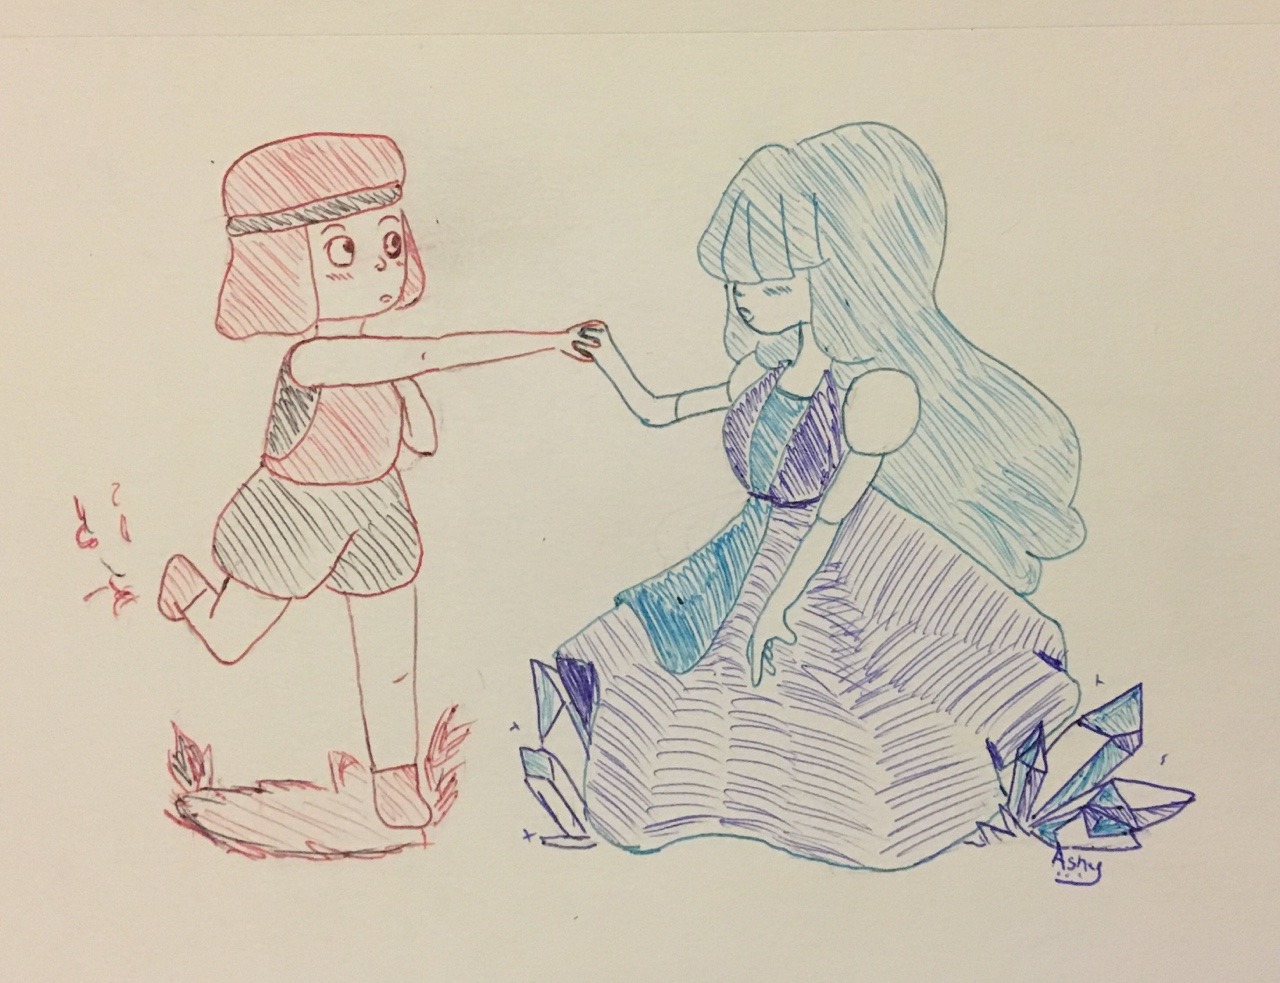 Did a ruby and sapphire drawing for inktober day 2! You know I had to do a little Steven universe cuz loveeeeeeeee